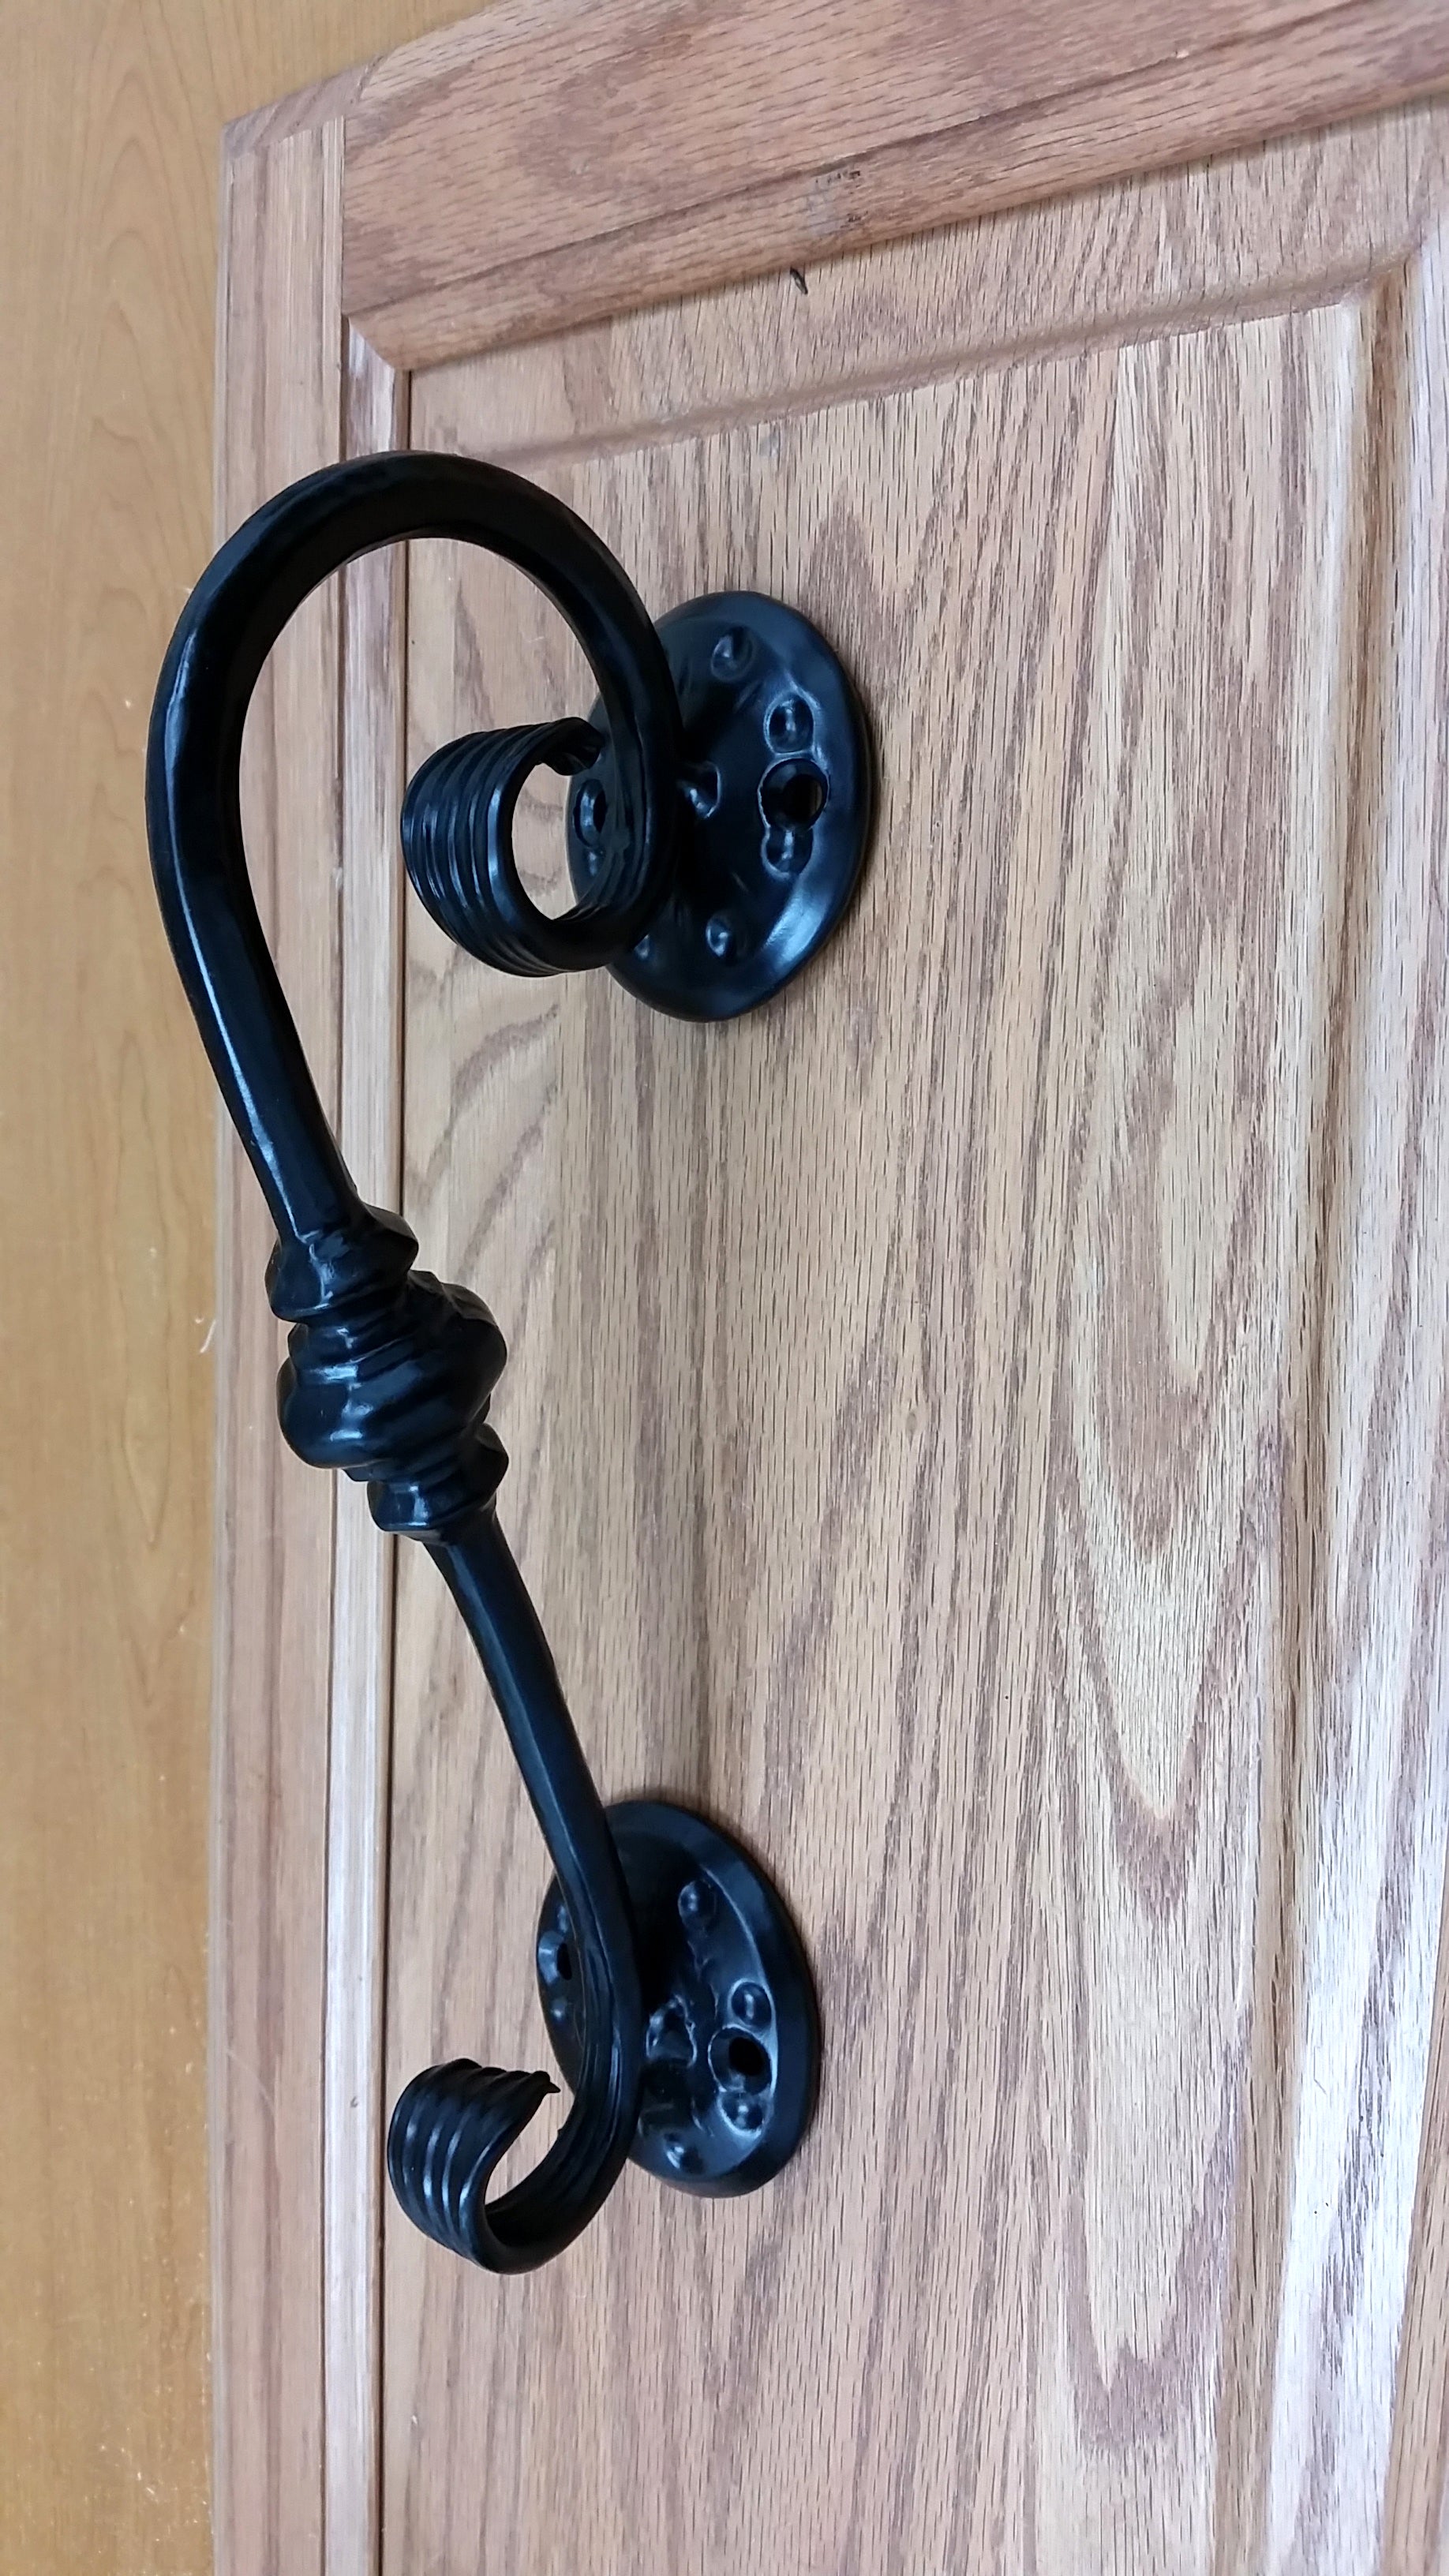 Scrolled Door Pull with decorative round base plates - Wild West Hardware